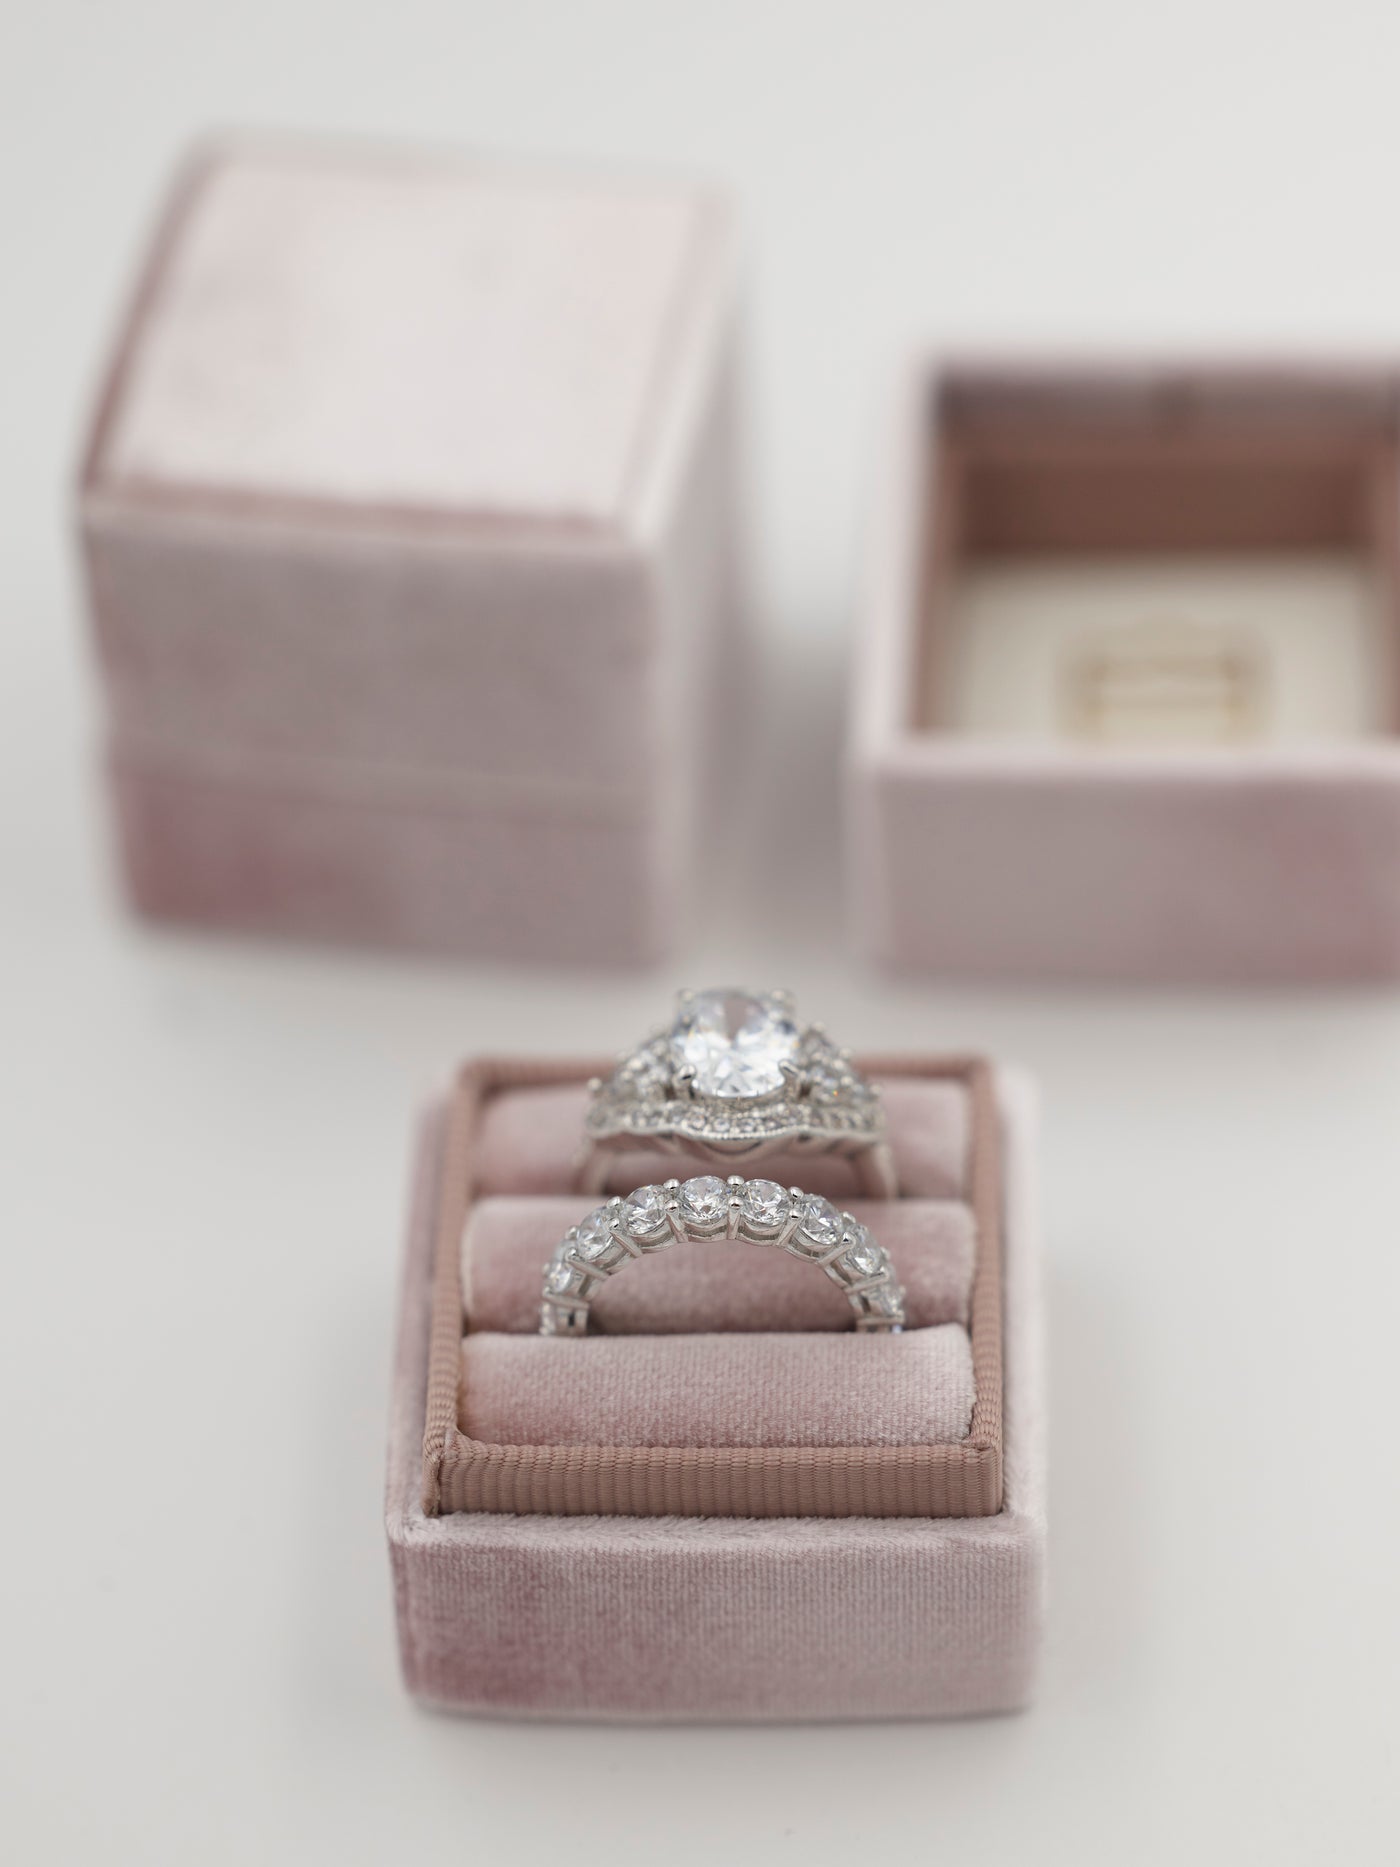 The Best Wedding Ring Boxes to Keep Your Rings Safe